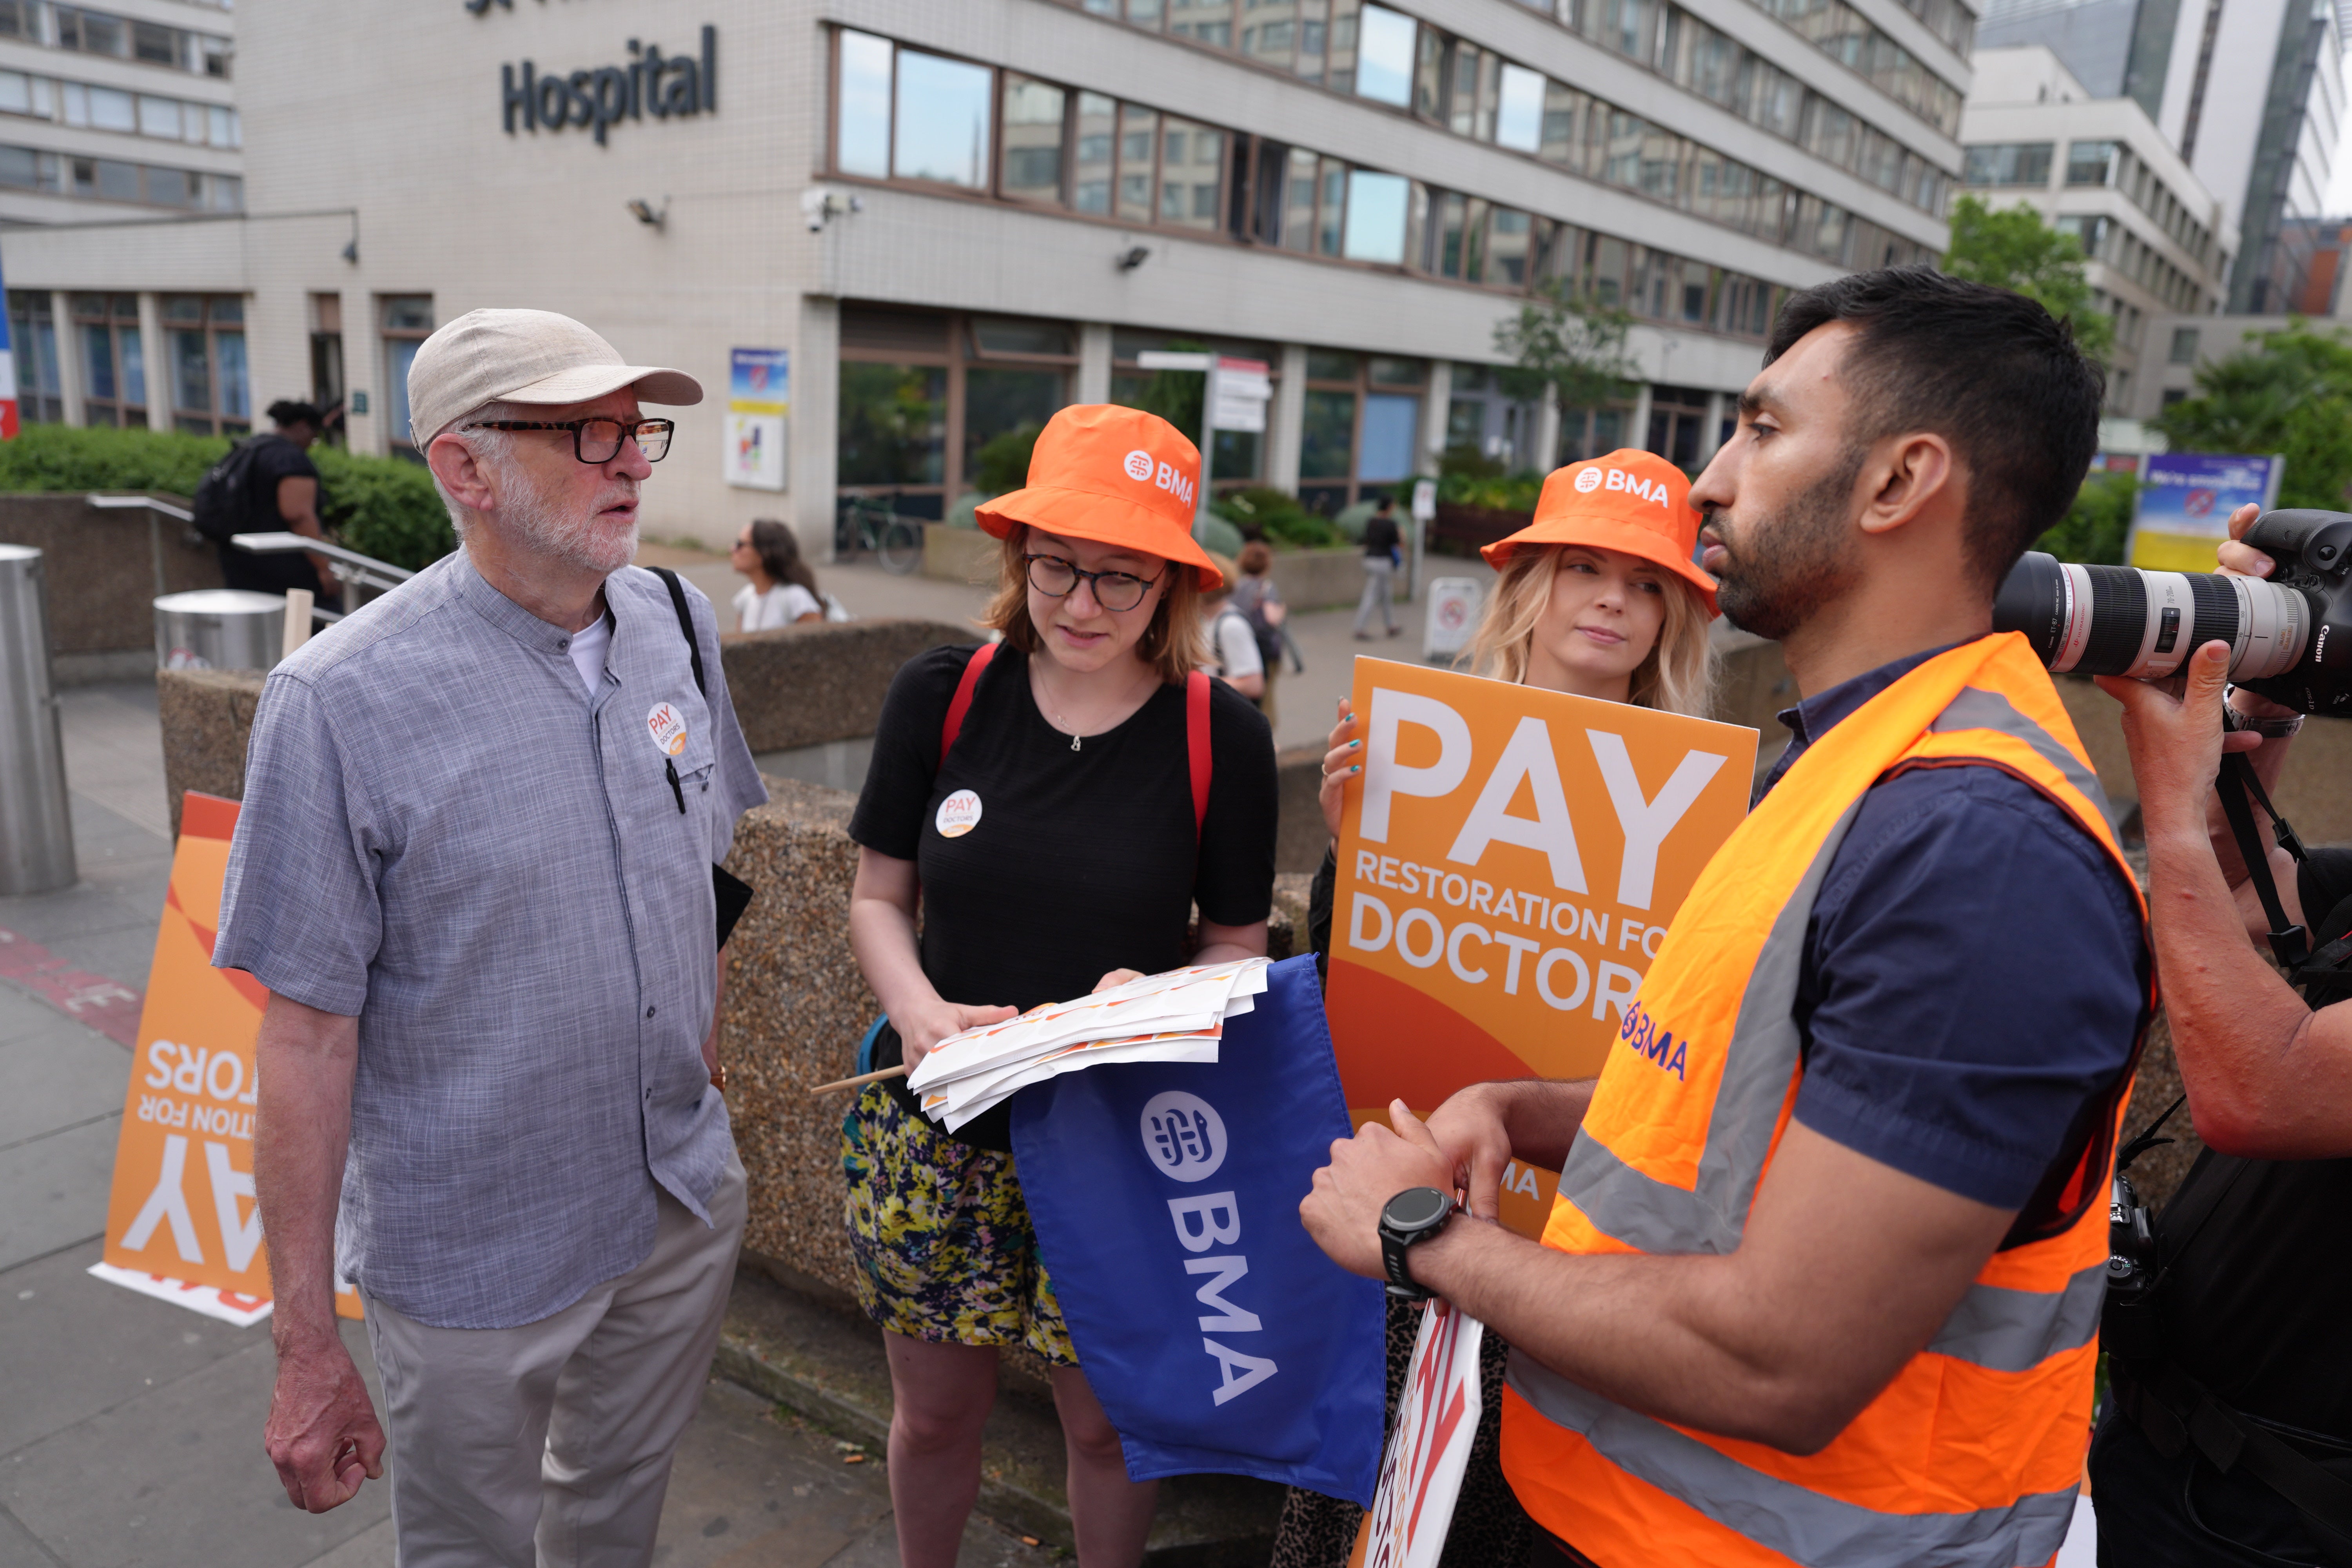 Jeremy Corbyn (left) joins junior doctors on the picket line outside St Thomas’ Hospital, London, during their latest five-day strike over pay demands